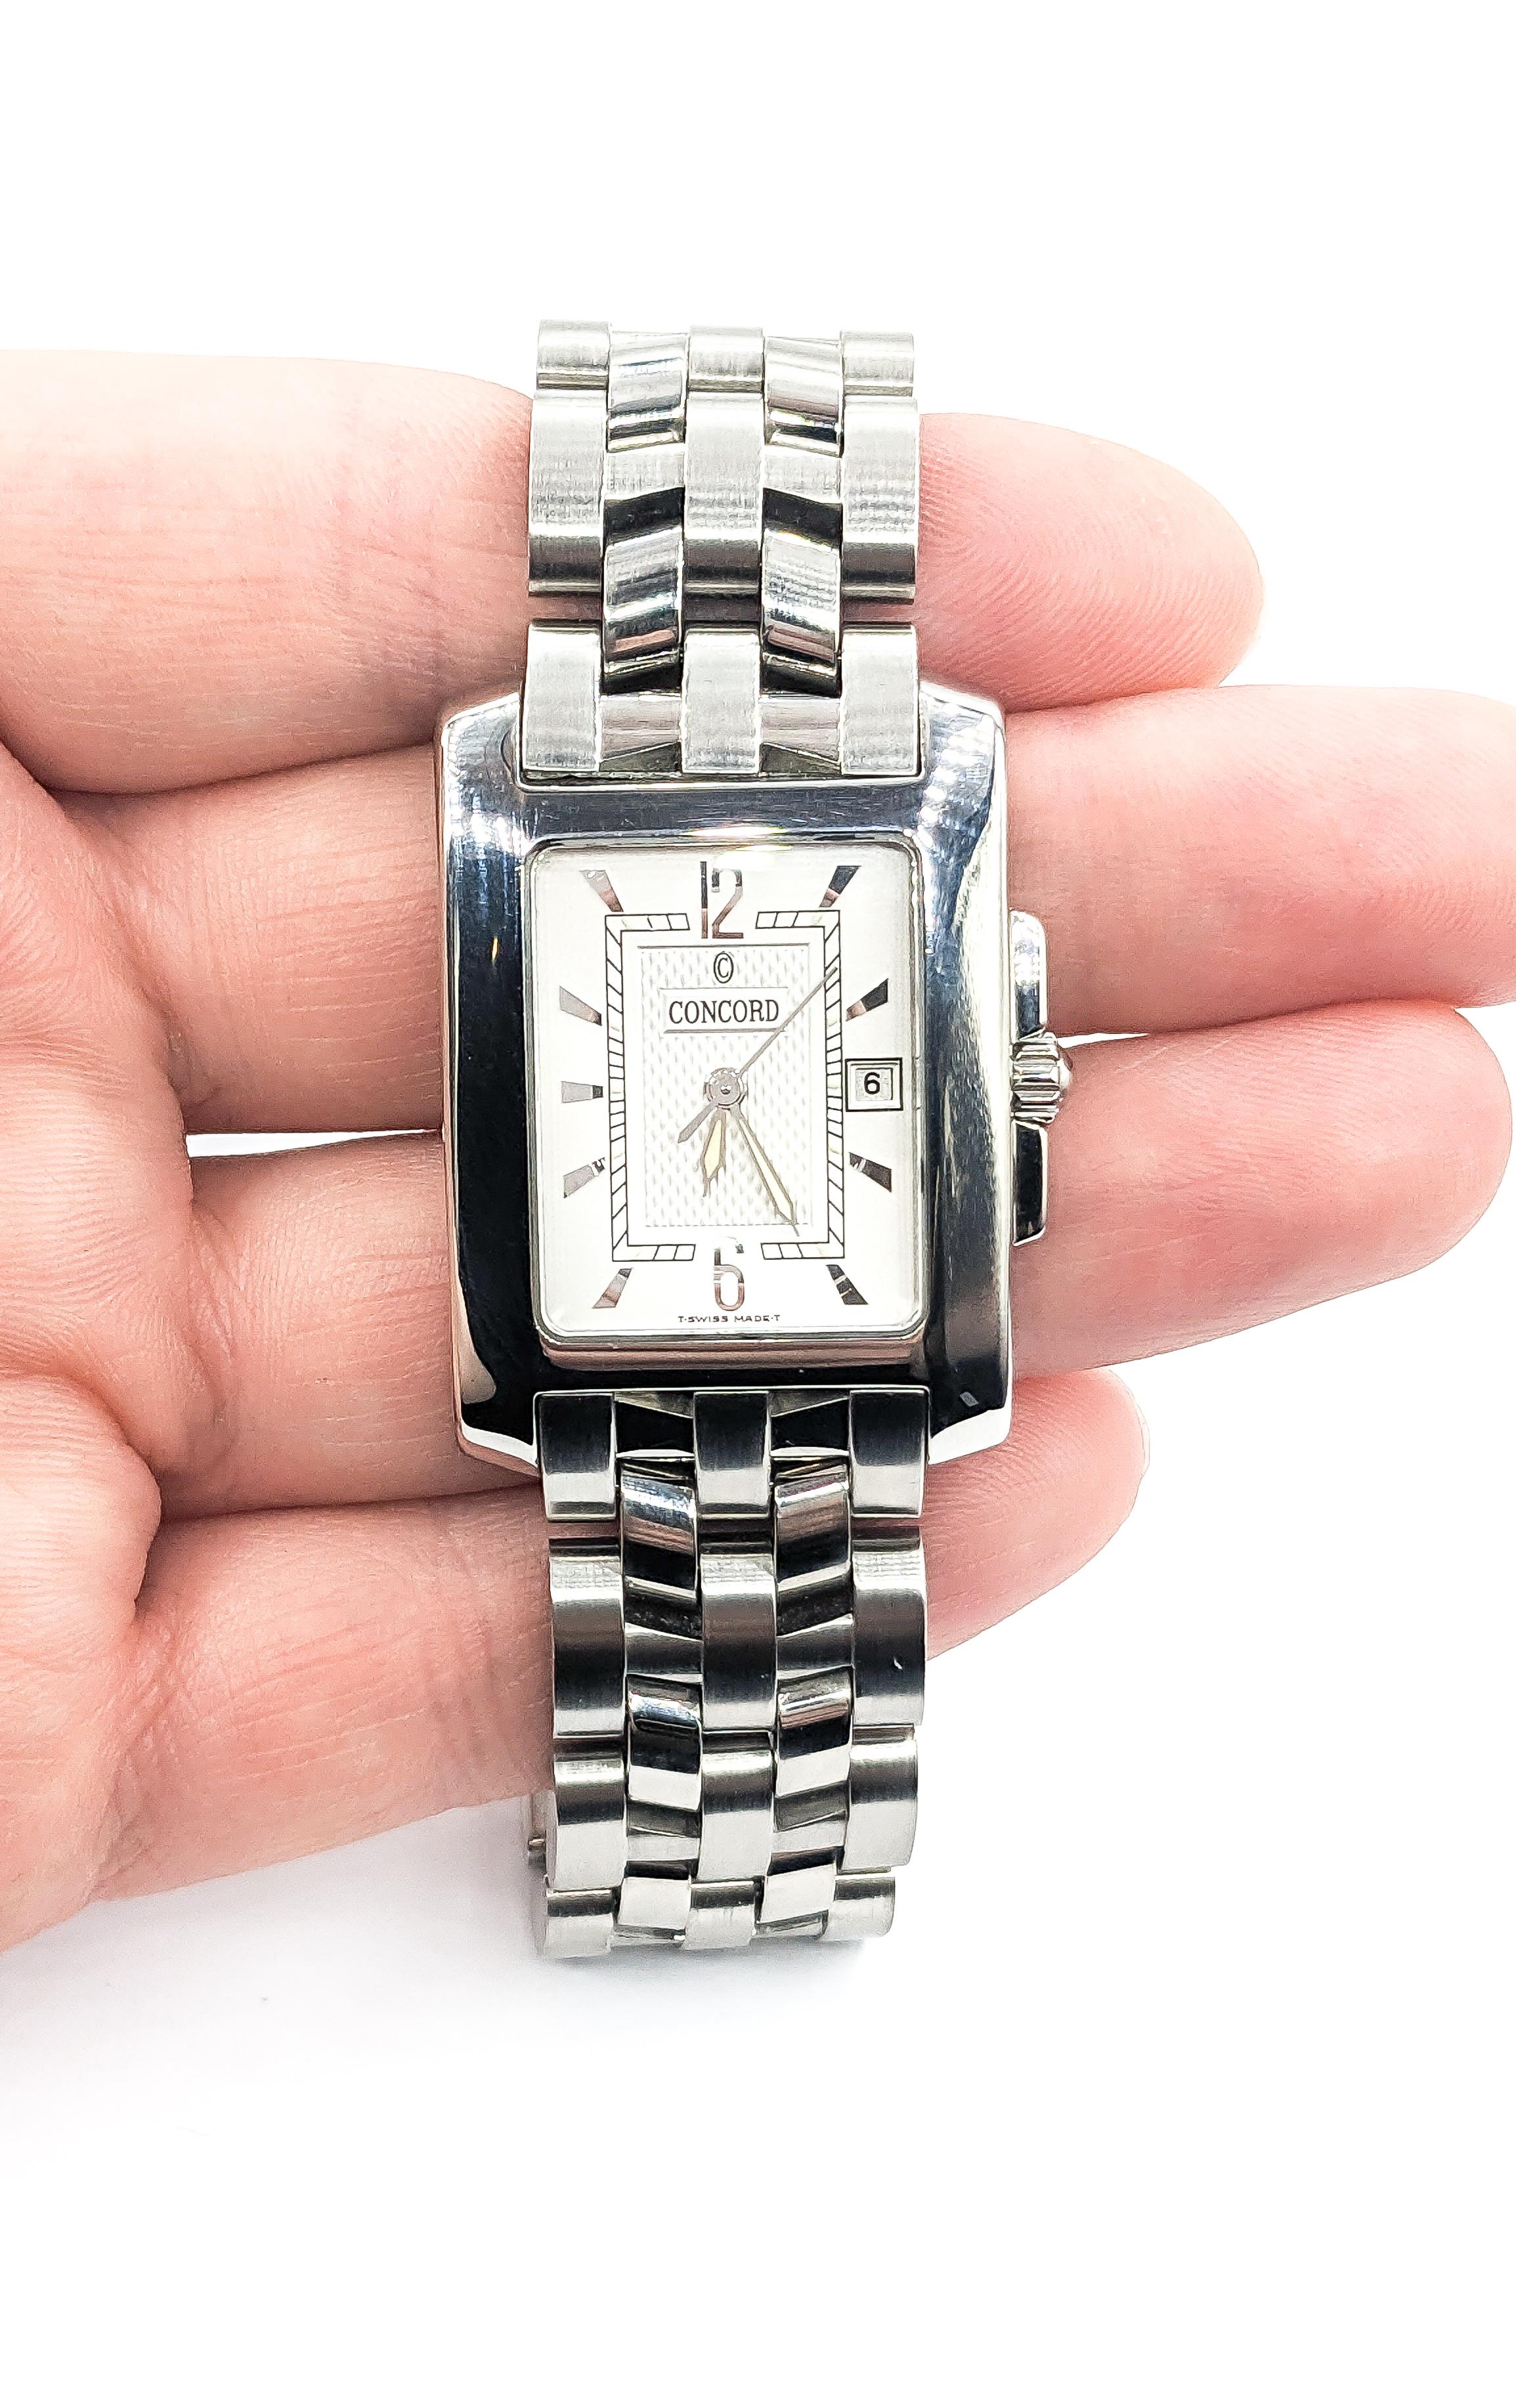 Men's Concord Sportivo Watch In Stainless Steel In Excellent Condition For Sale In Bloomington, MN